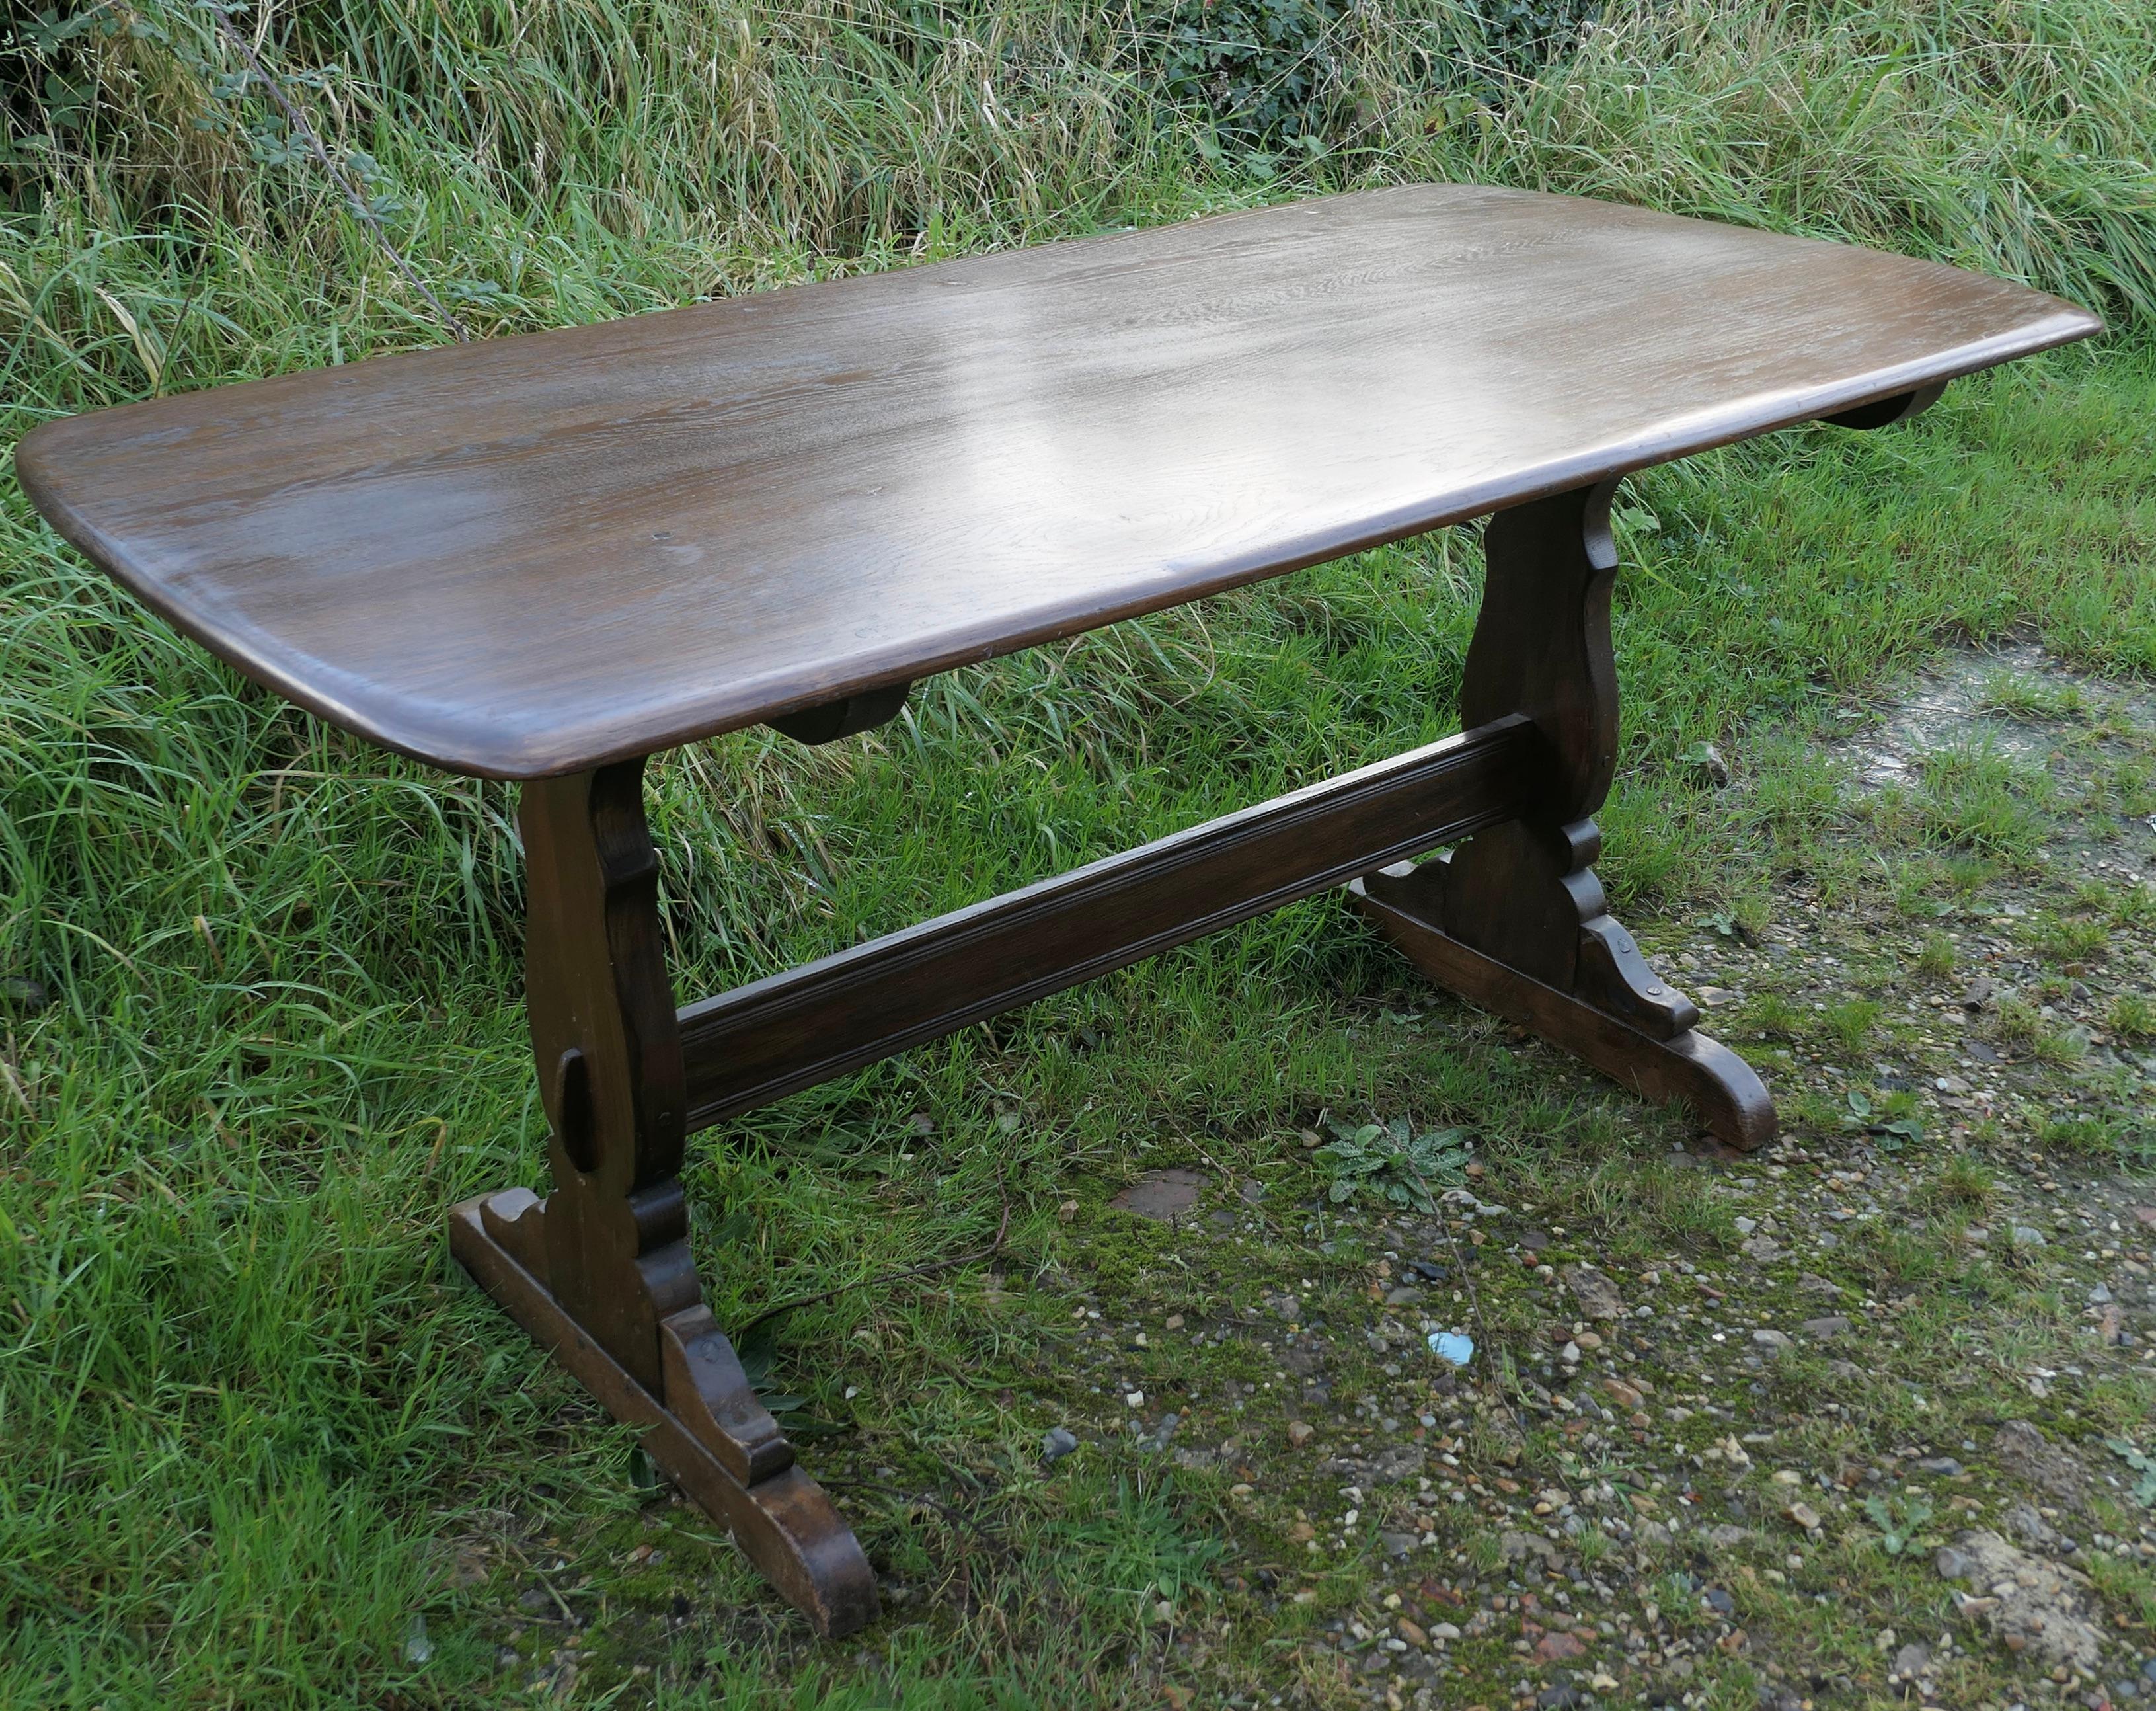 Good Quality Elm Refectory Dining Table

This is a Superb piece it is a good quality Country Elm Table in the refectory style, the table top has a curved edge with a slight boat shape to the top. The legs are chunky in the refectory style with a